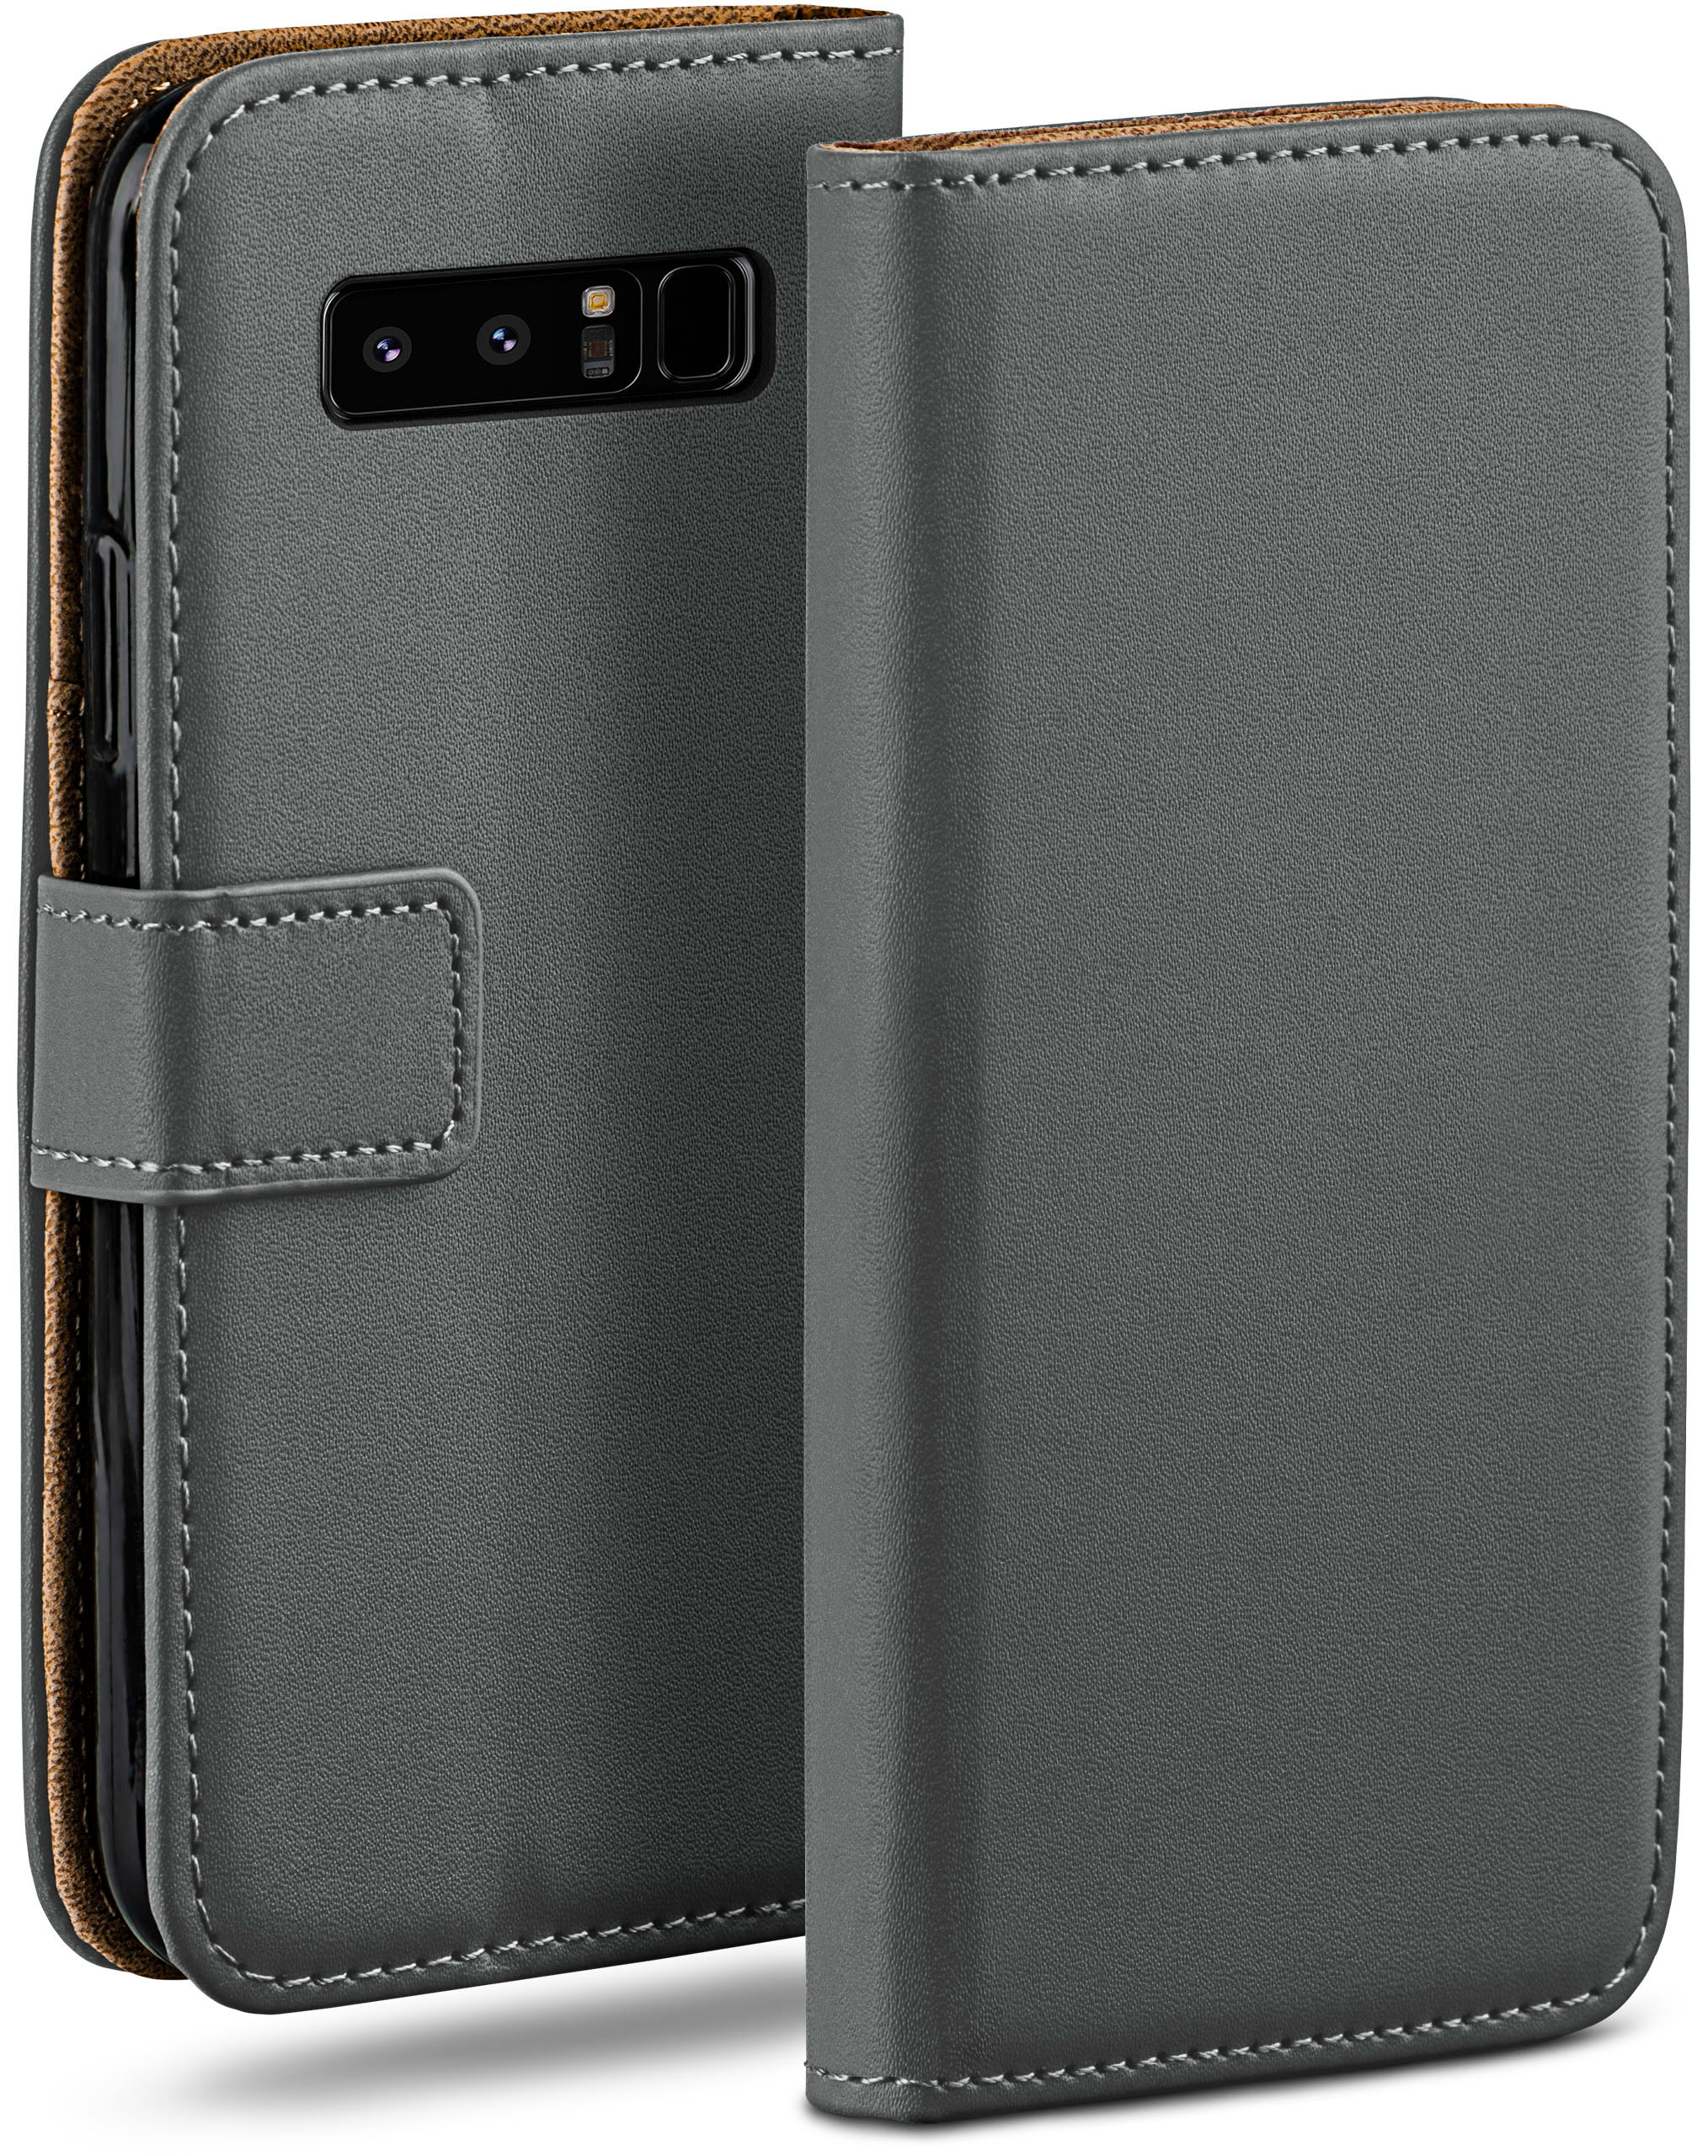 Samsung, 8, Bookcover, Anthracite-Gray MOEX Case, Note Book Galaxy